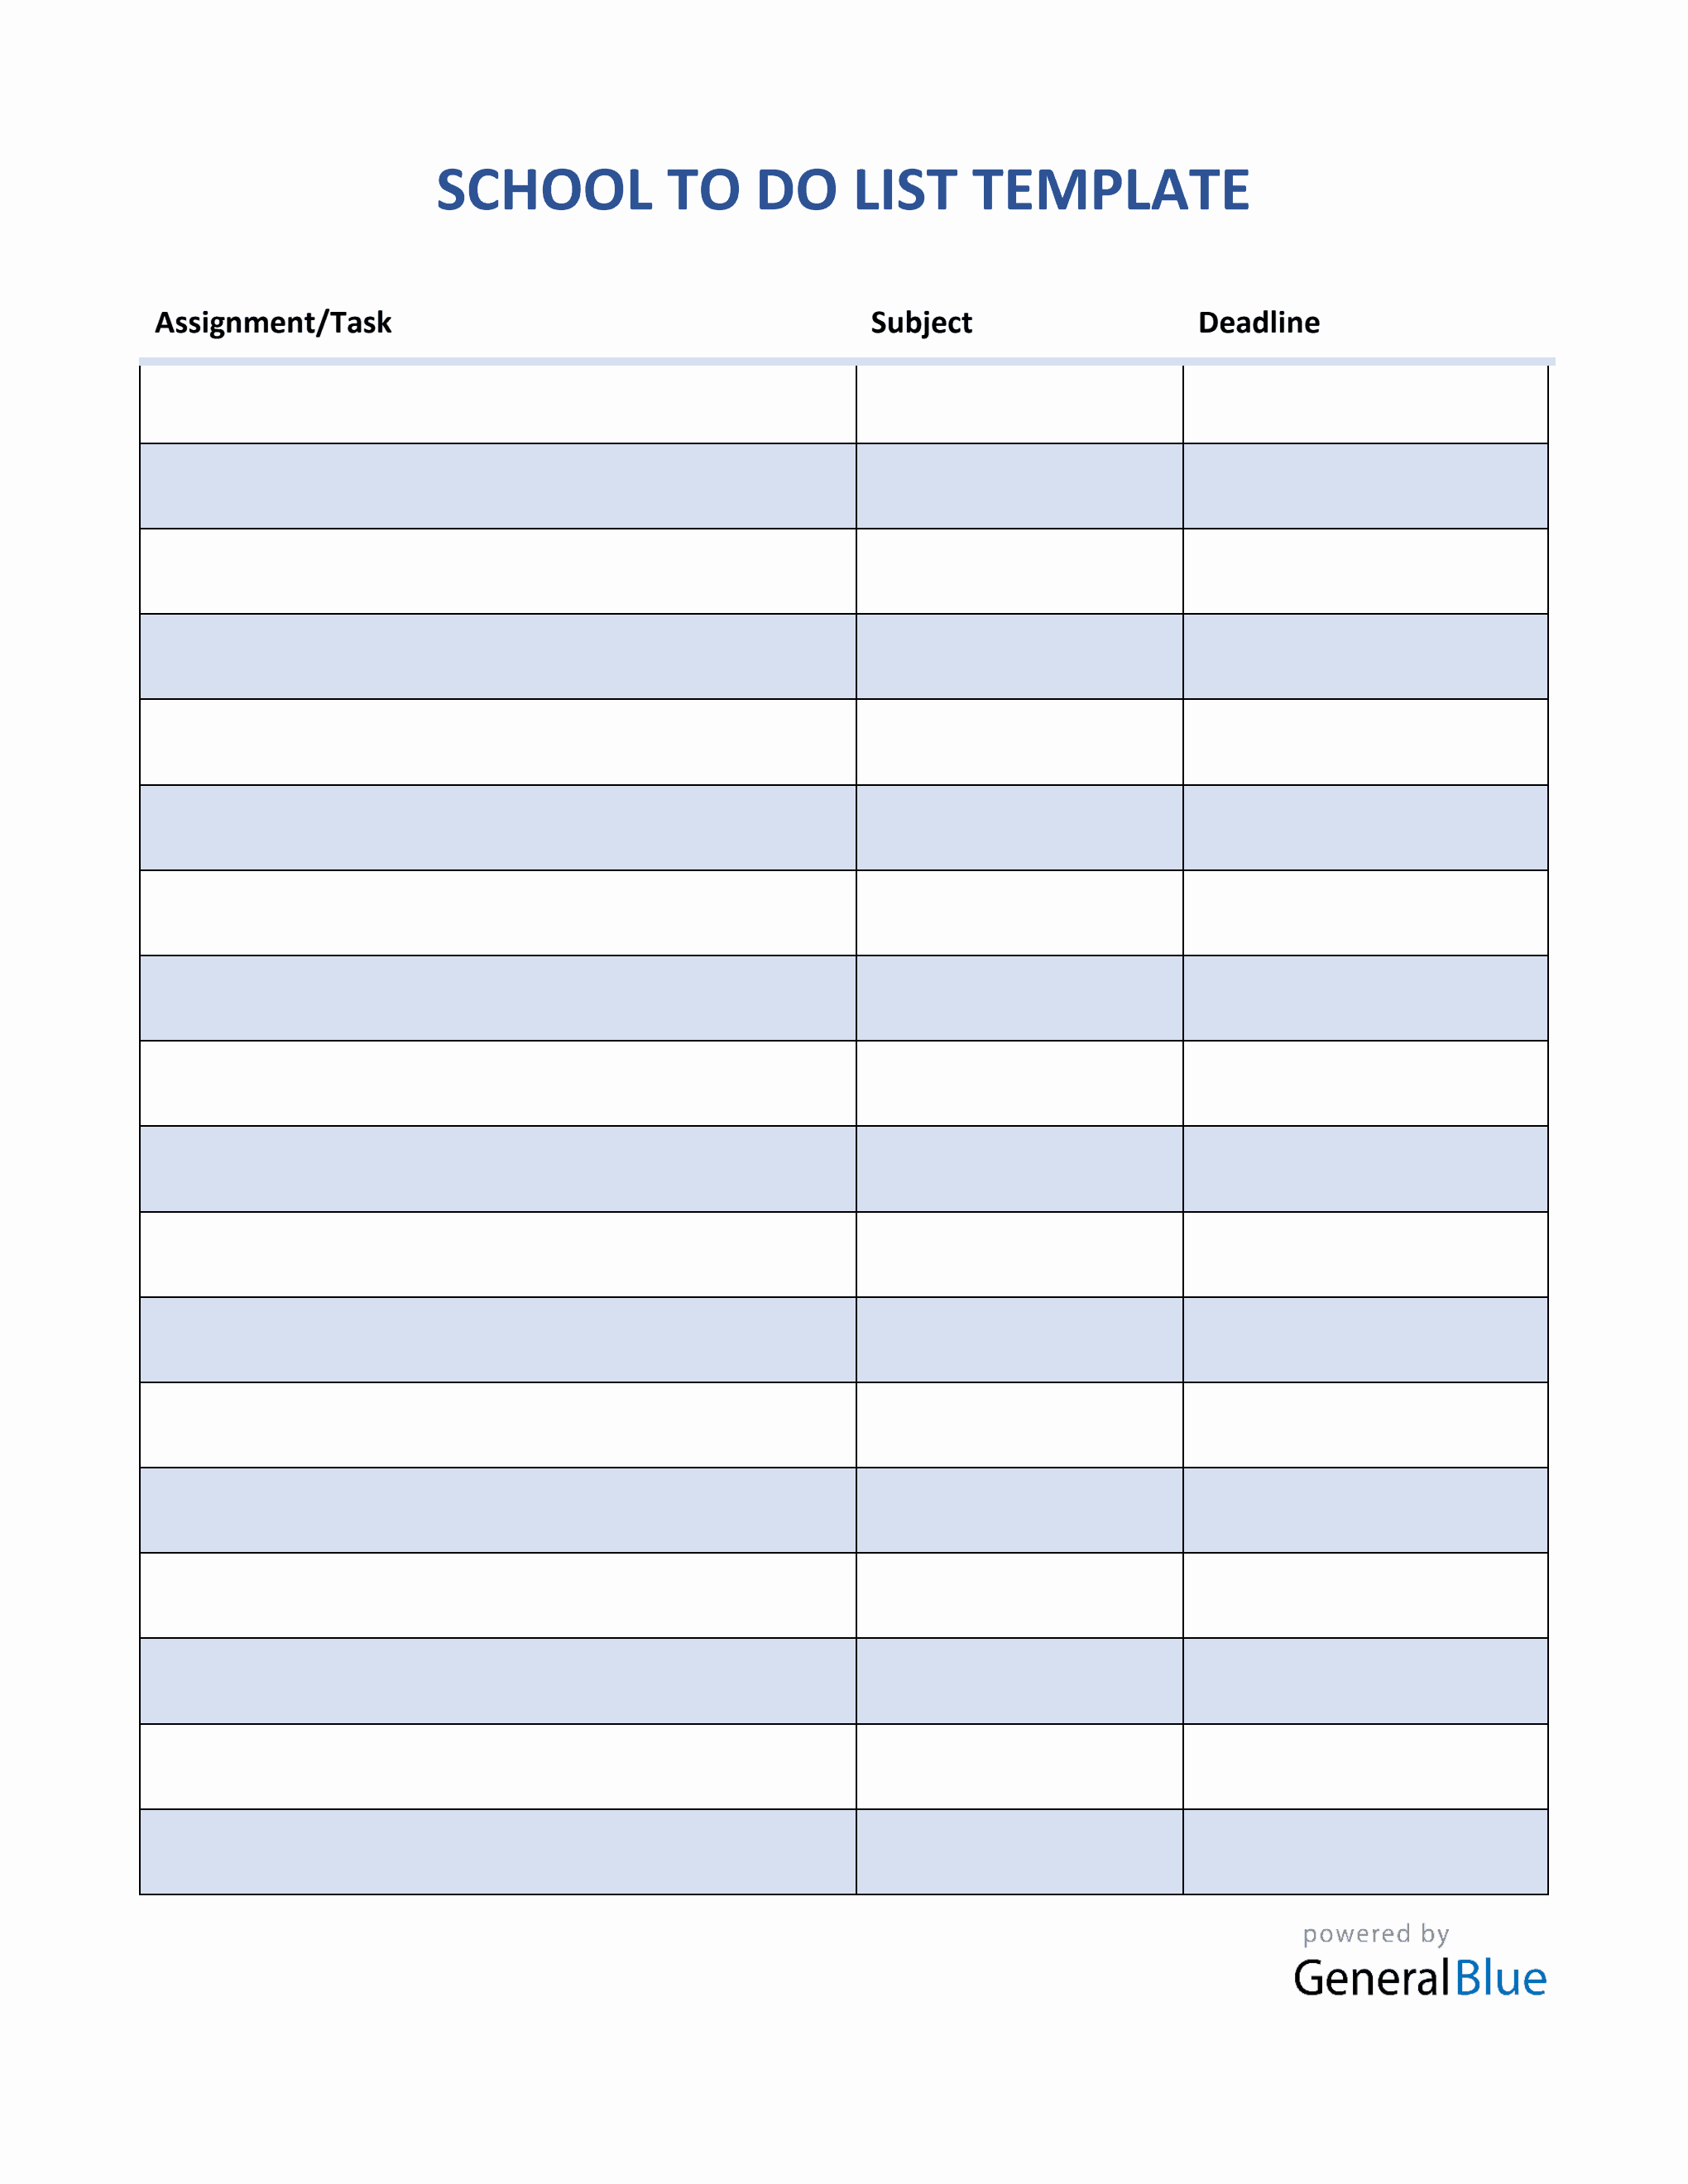 school to do list template in pdf